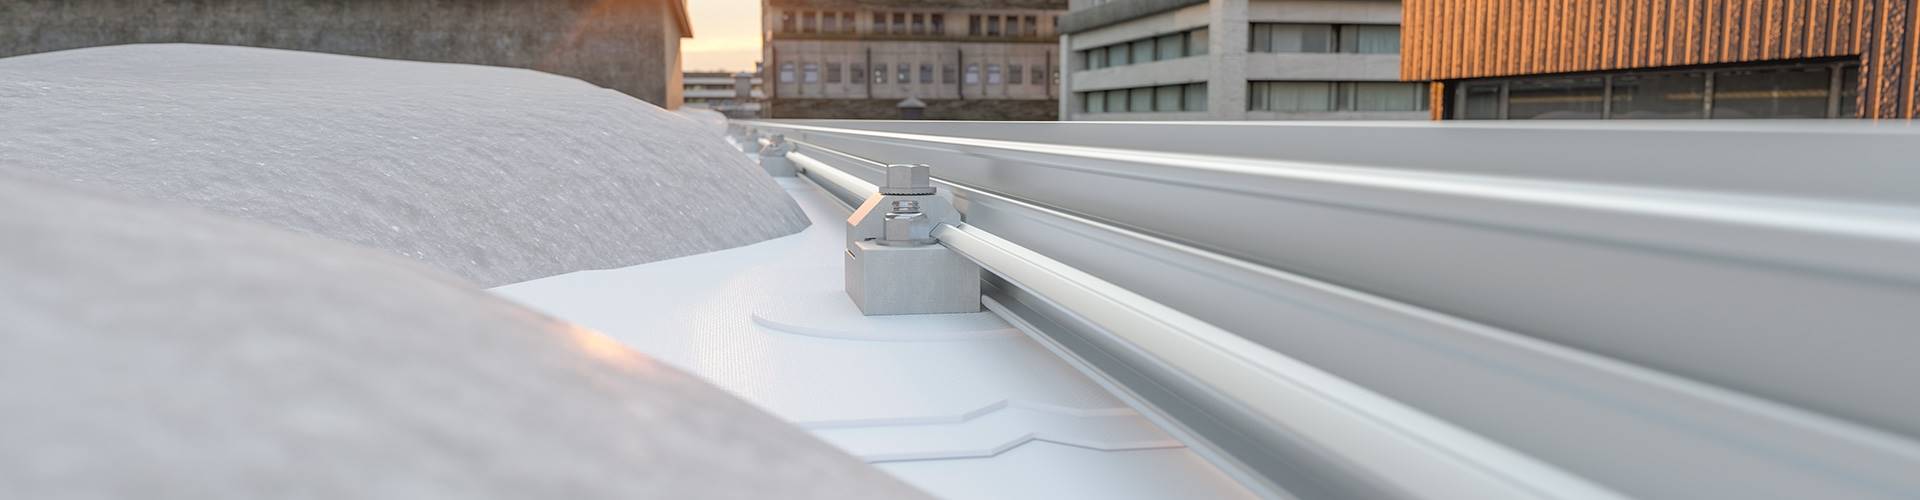 Snow Guards for Membrane Roofing